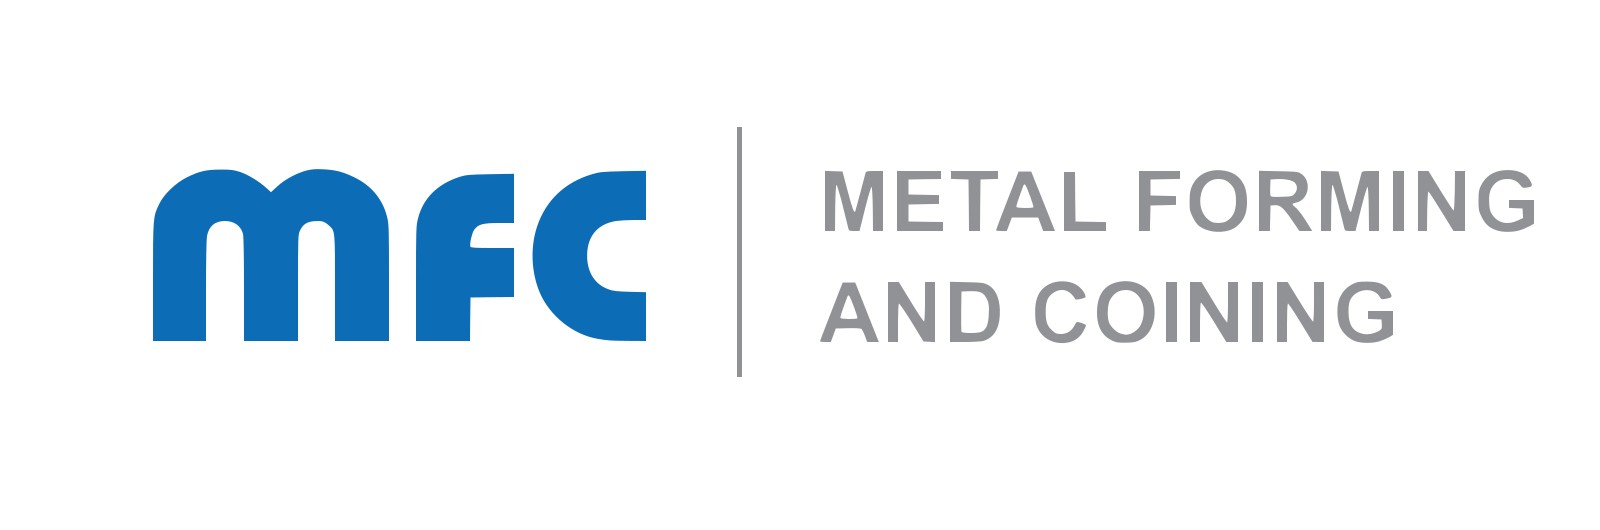 Metal Forming & Coining Corp.